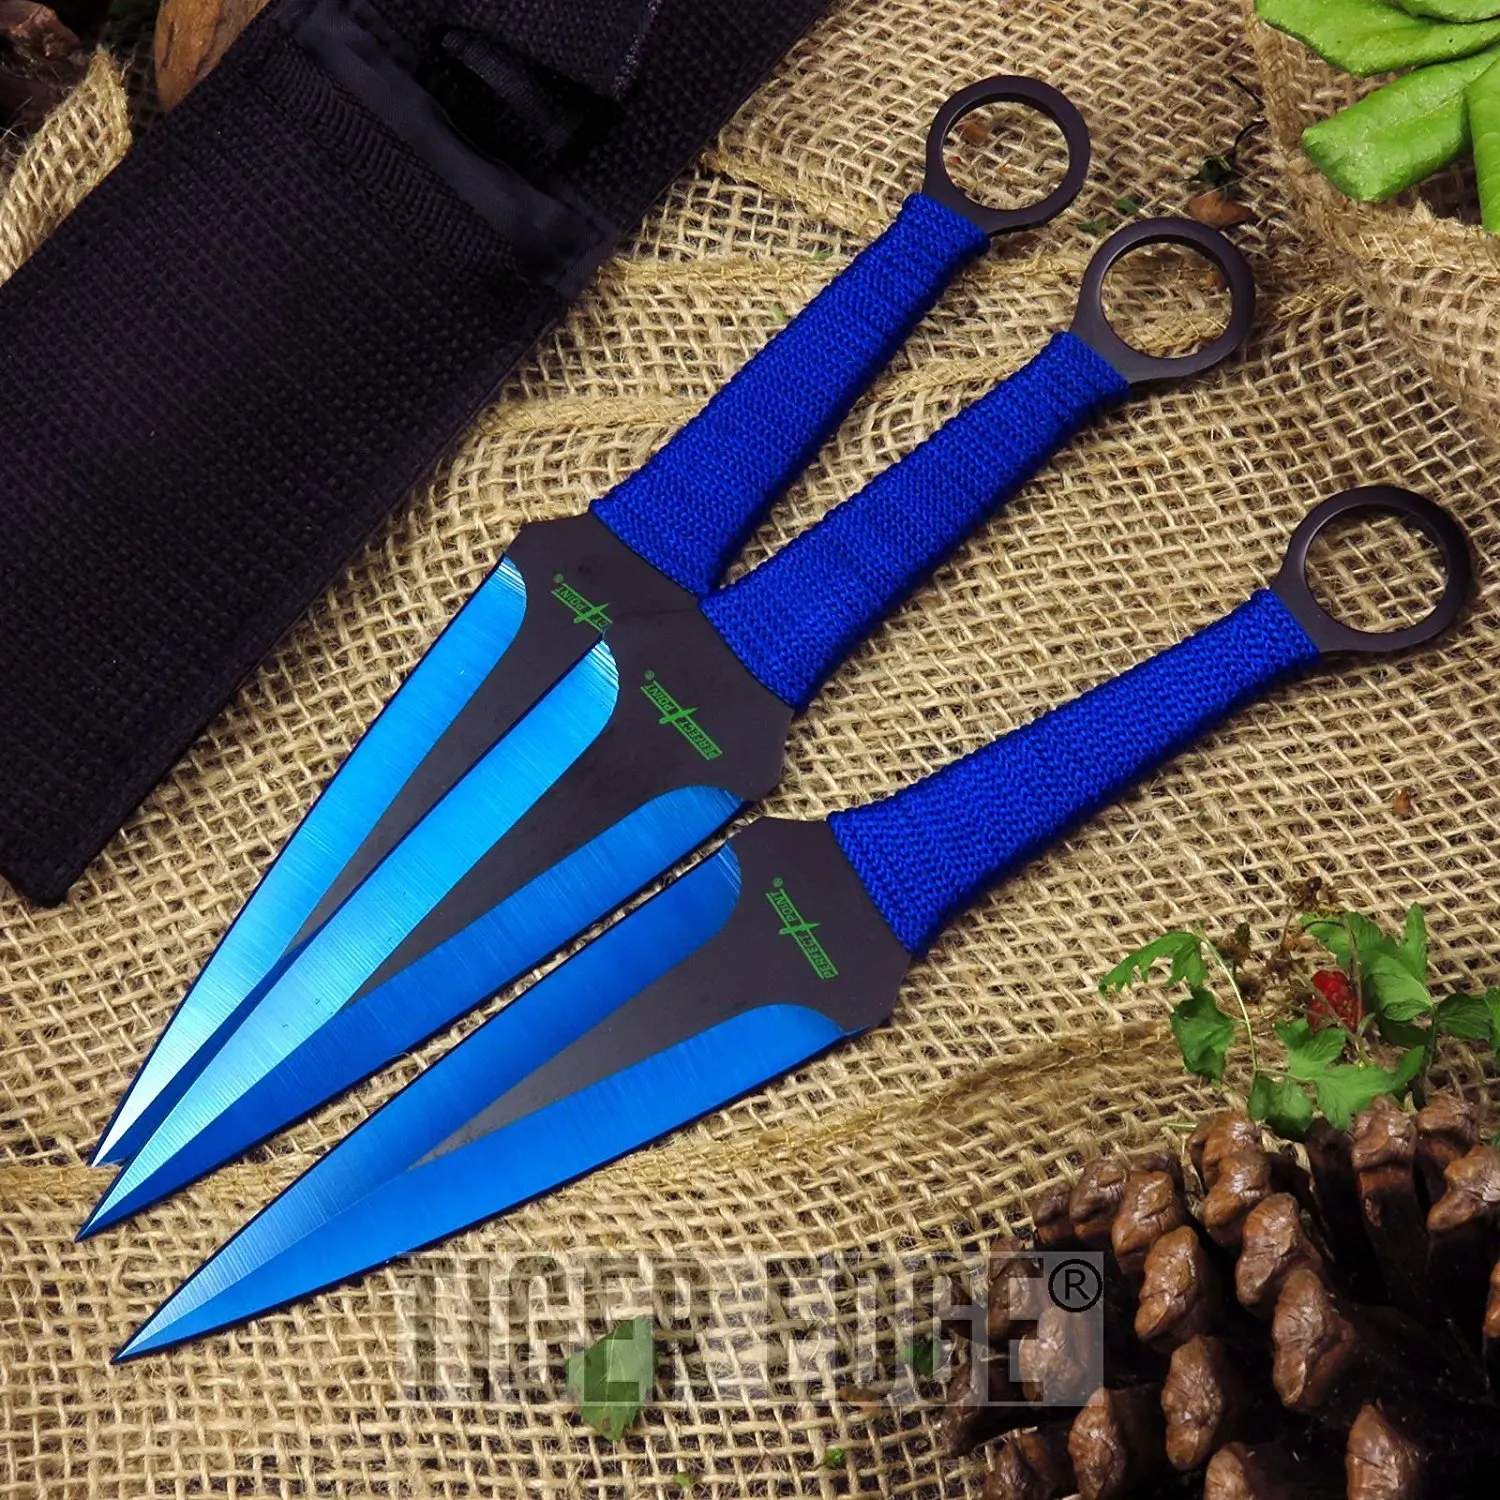 Cheap Naruto Knife, find Naruto Knife deals on line at Alibaba.com